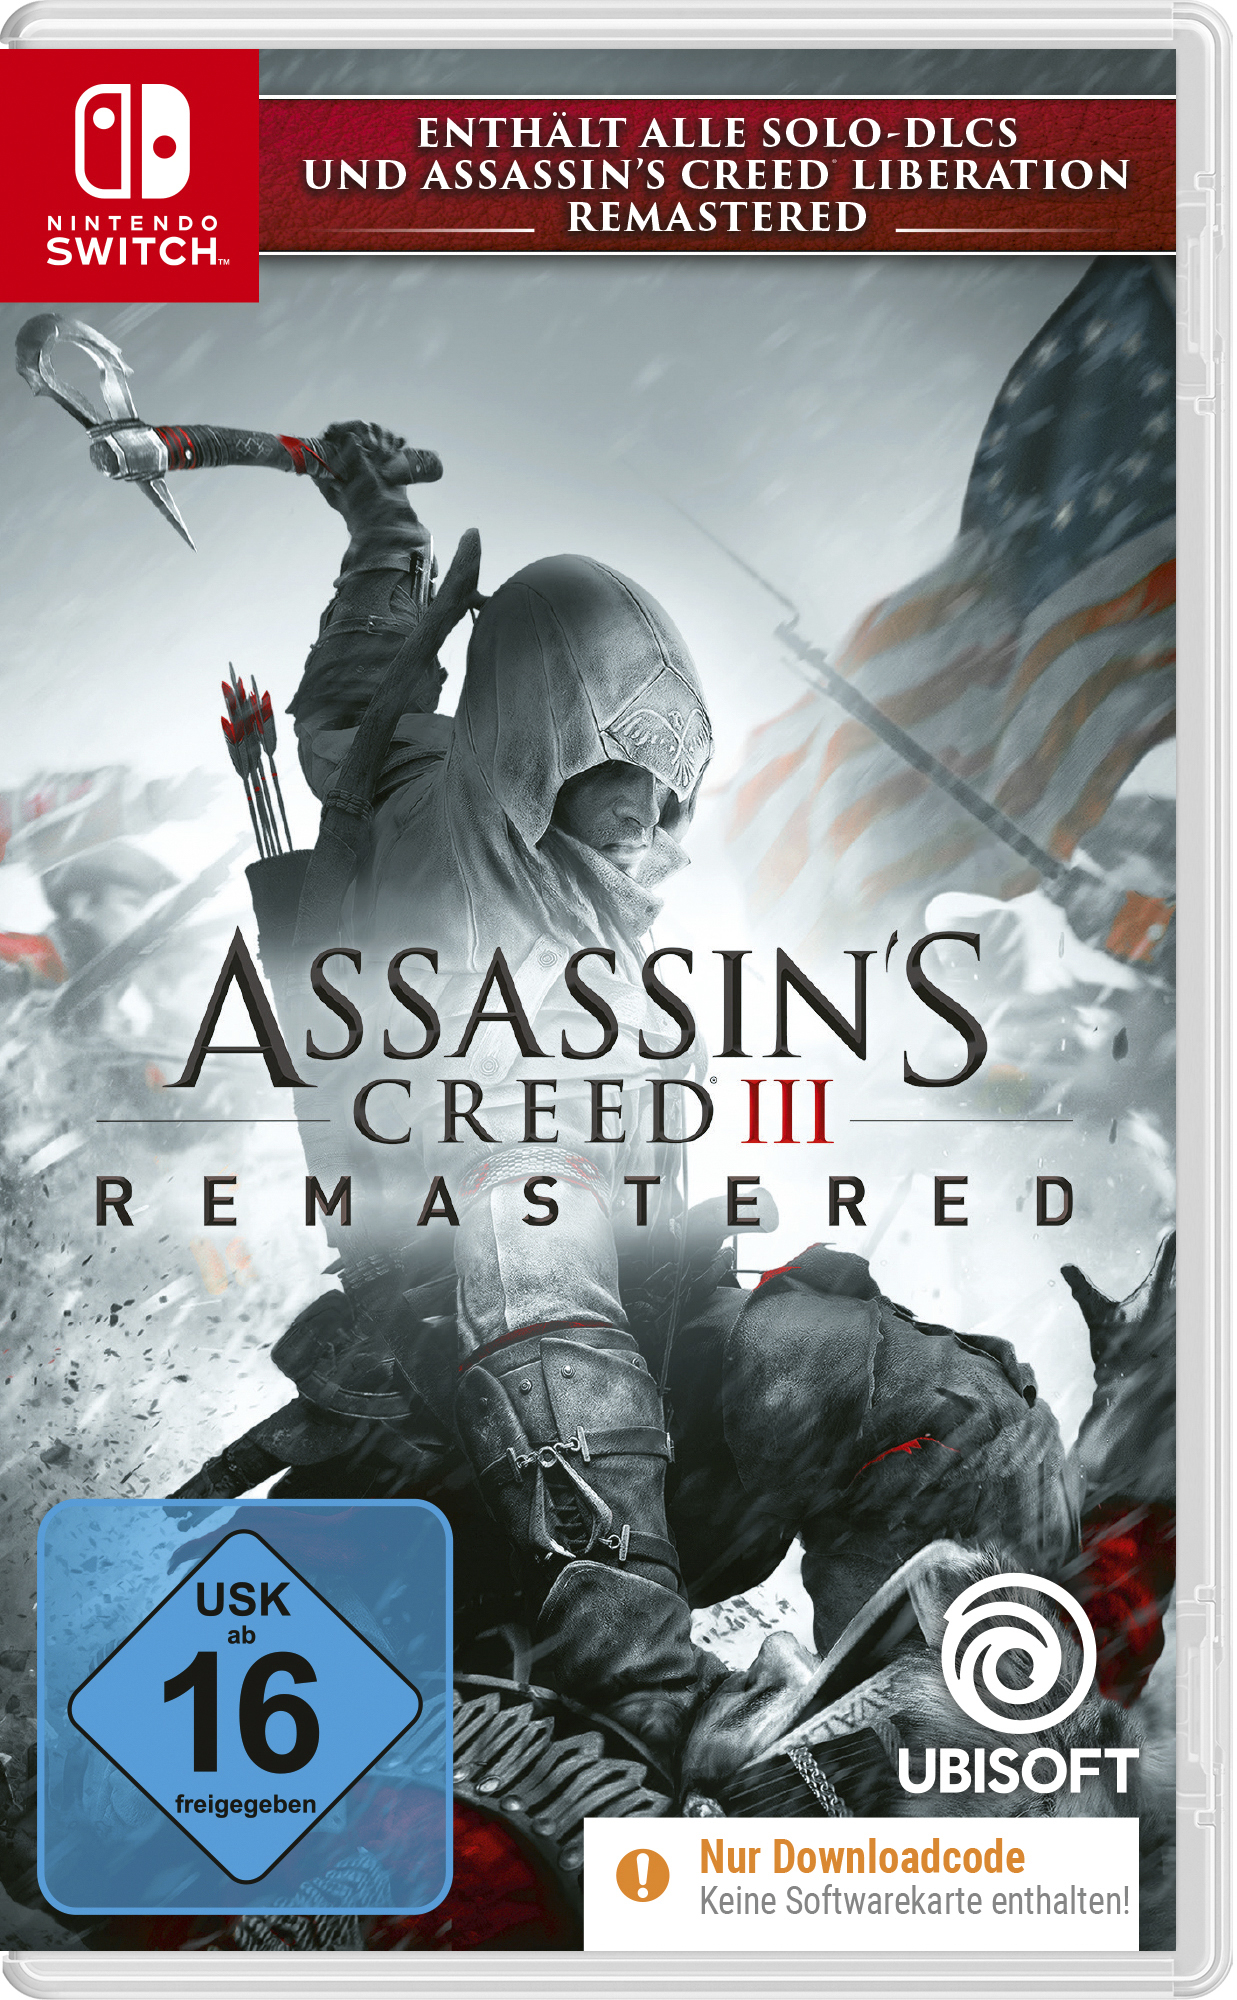 Switch] 3 Creed Box) in - Assassin\'s (Code [Nintendo Remastered the